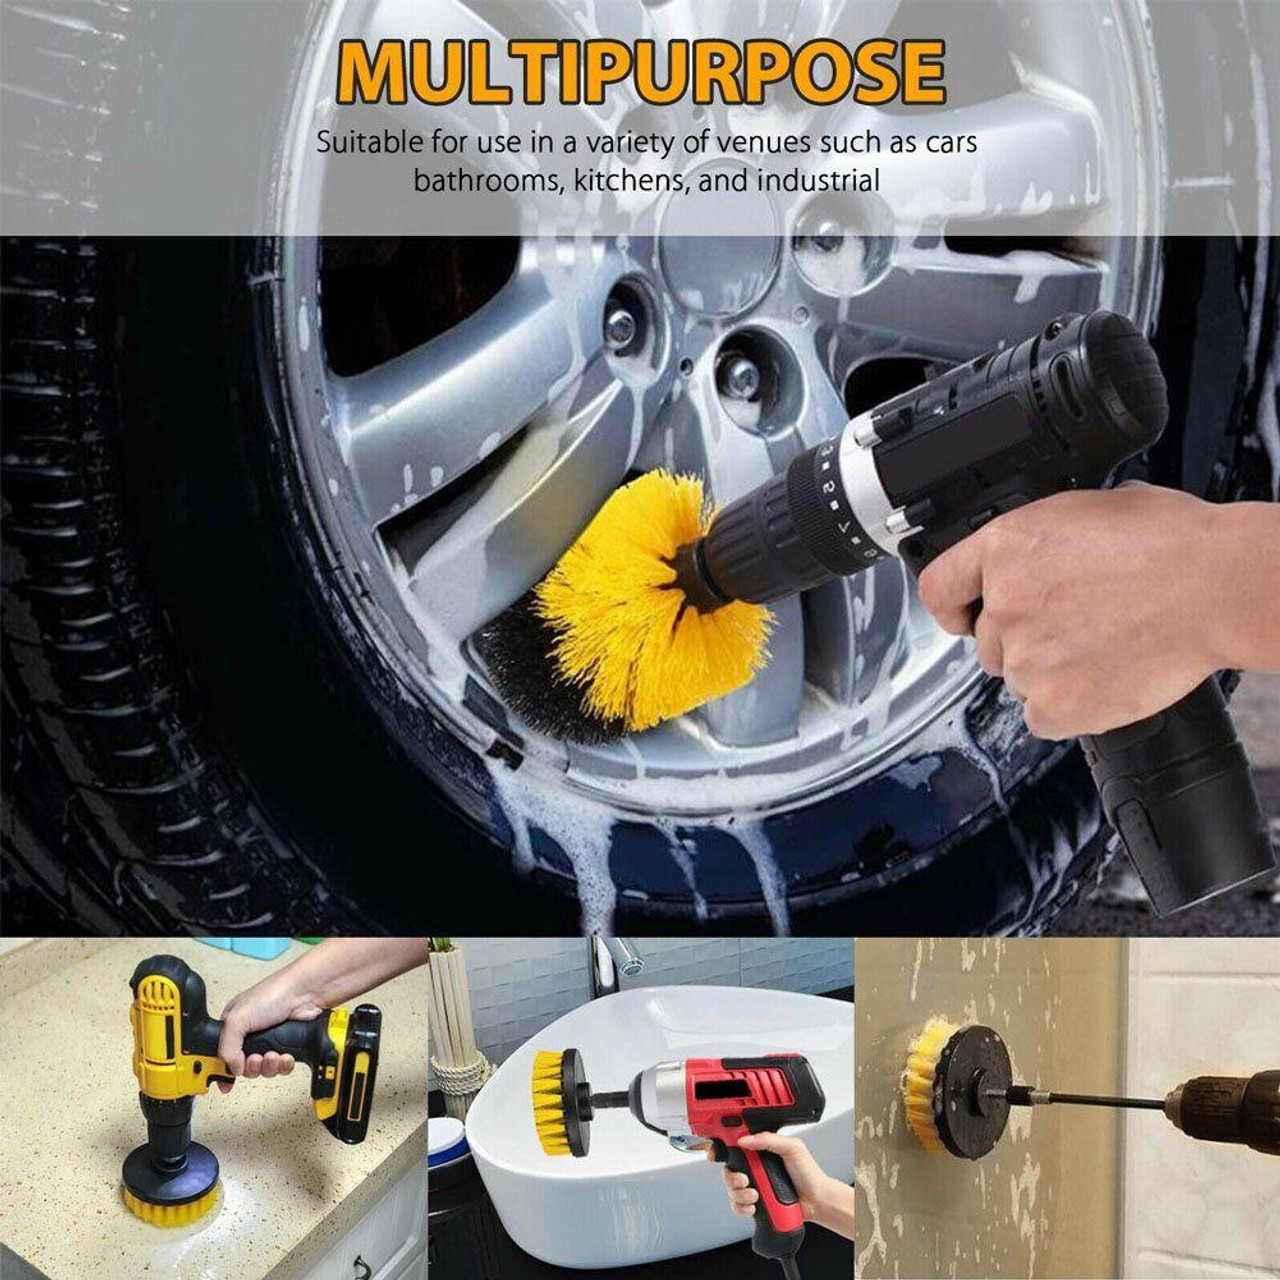 https://cdn11.bigcommerce.com/s-zrh8tkpr8d/images/stencil/1280x1280/products/10076/30352/1221-pcs-electric-drill-brush-attachment-set-cleaning-kit-power-scrubber-pads__04990.1675296151.jpg?c=2&imbypass=on